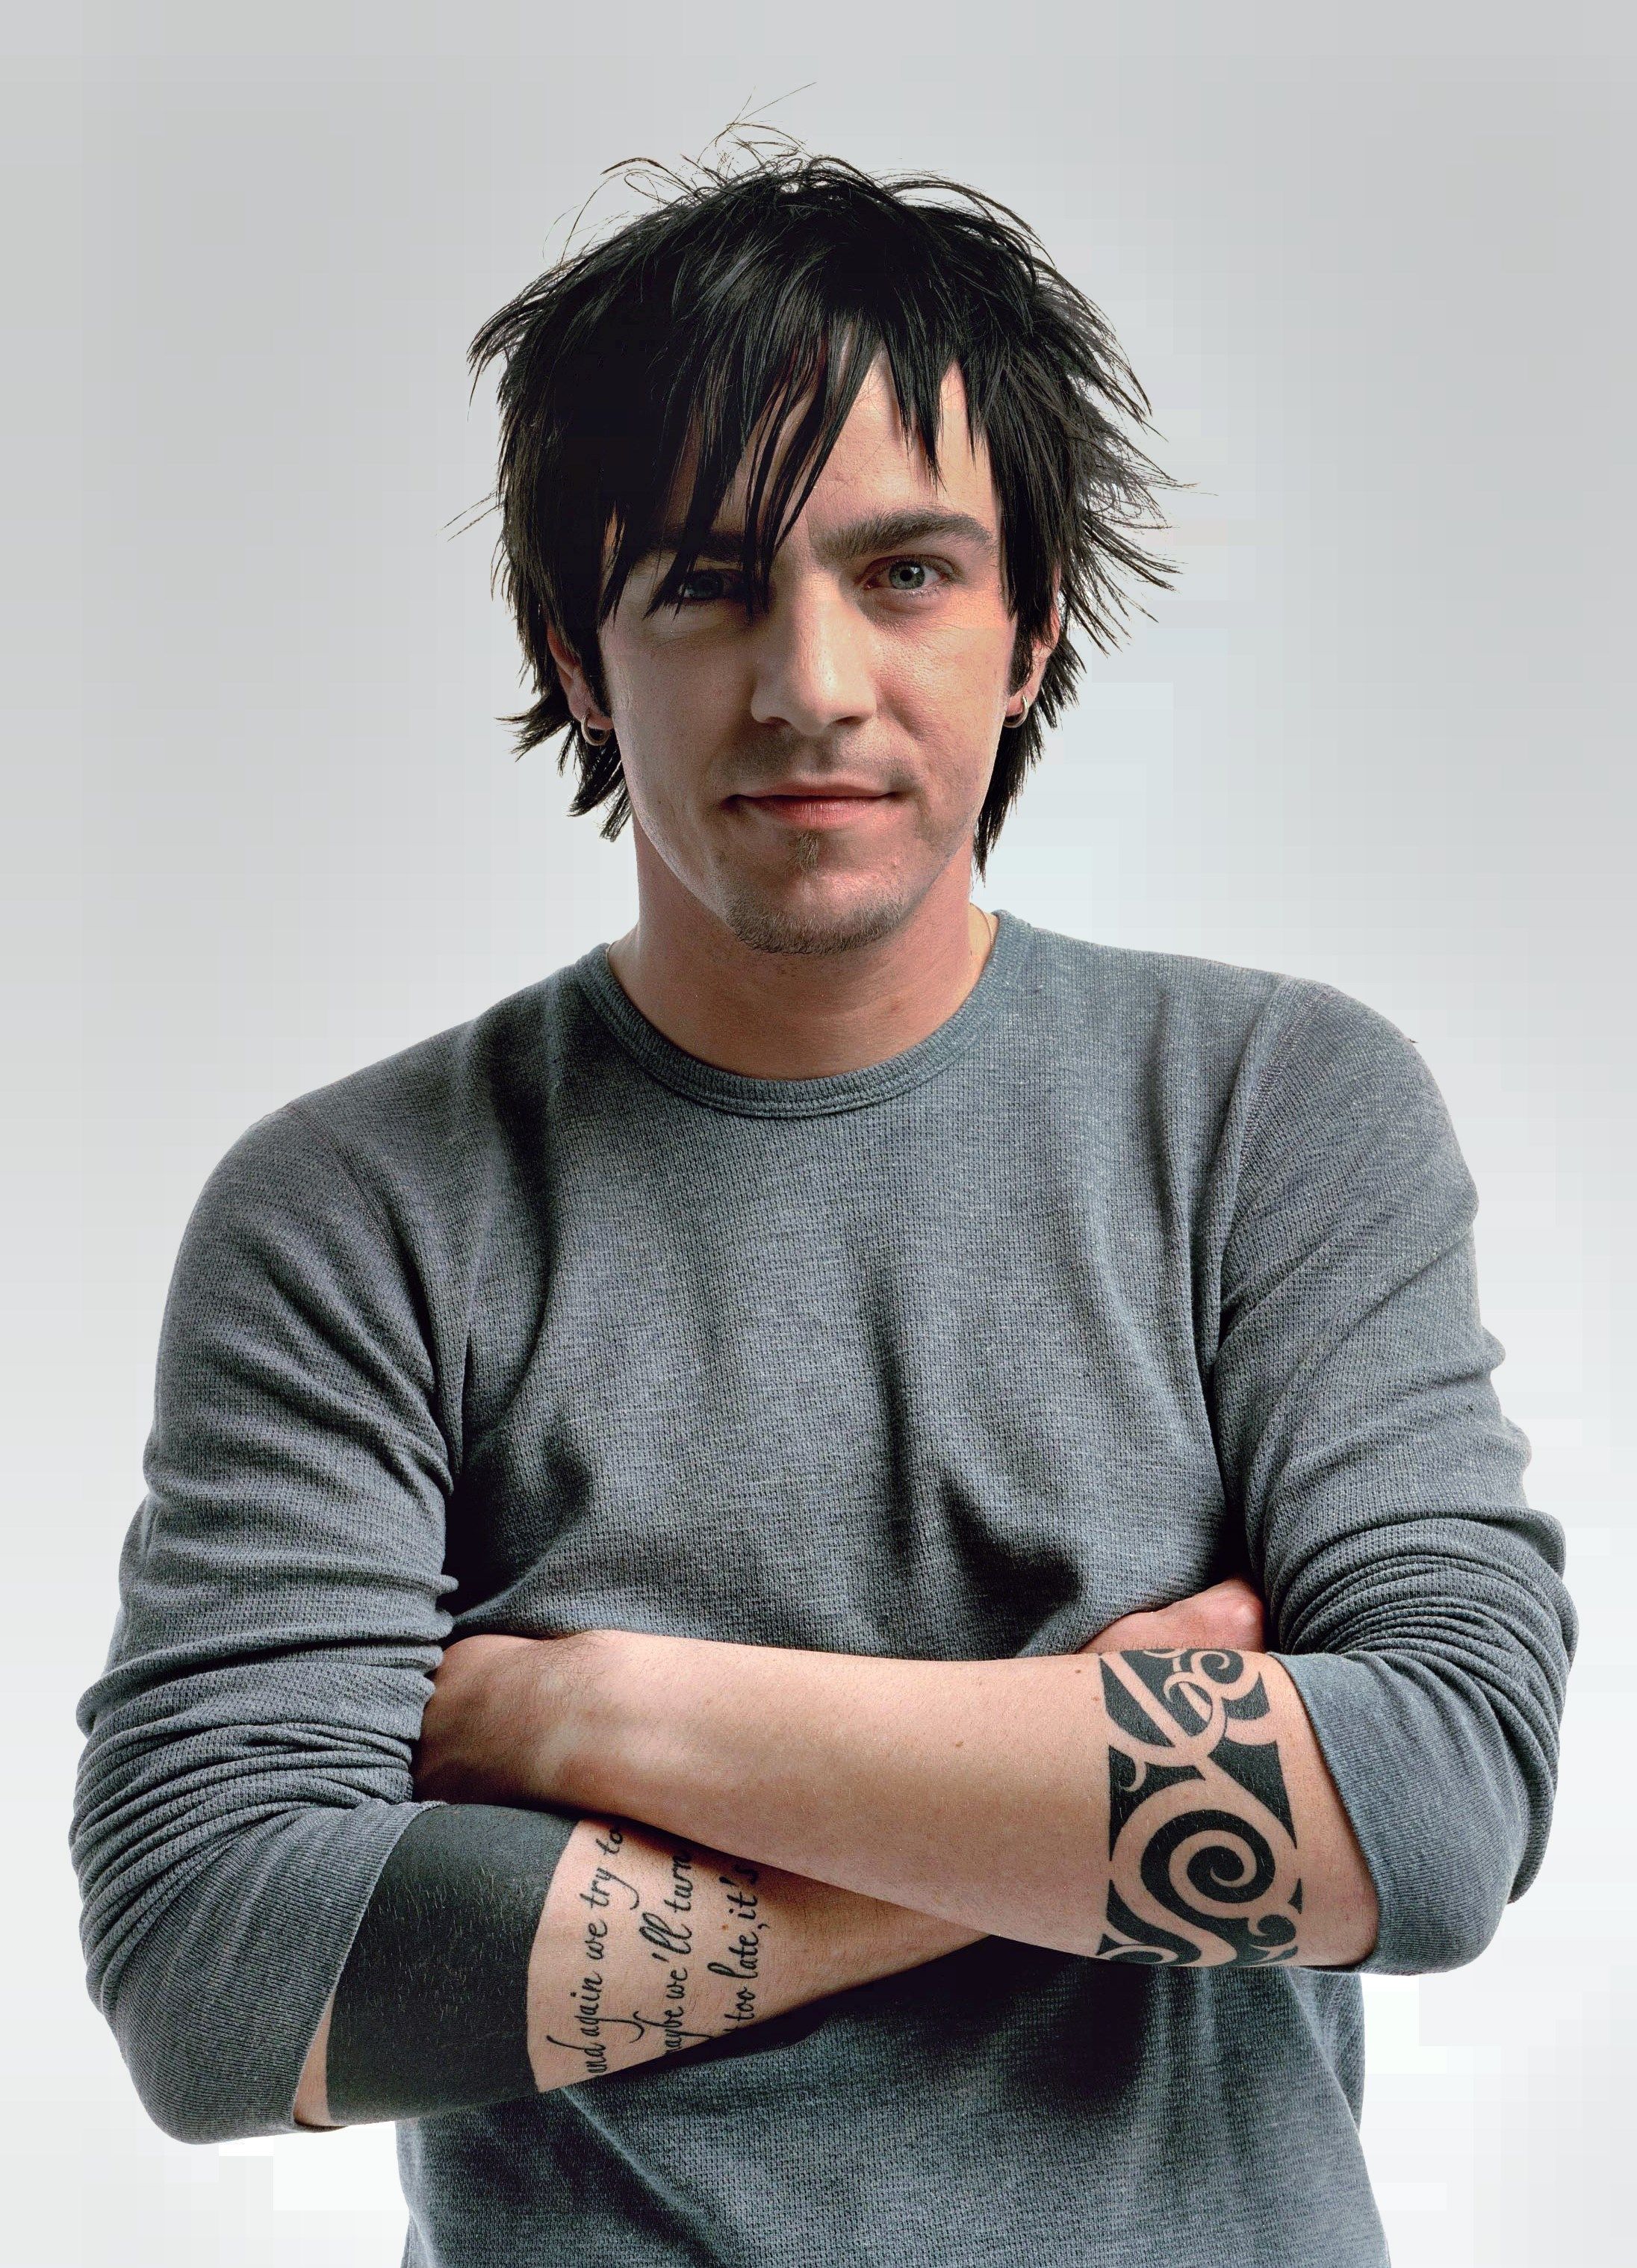 Adam Gontier. Known people people news and biographies